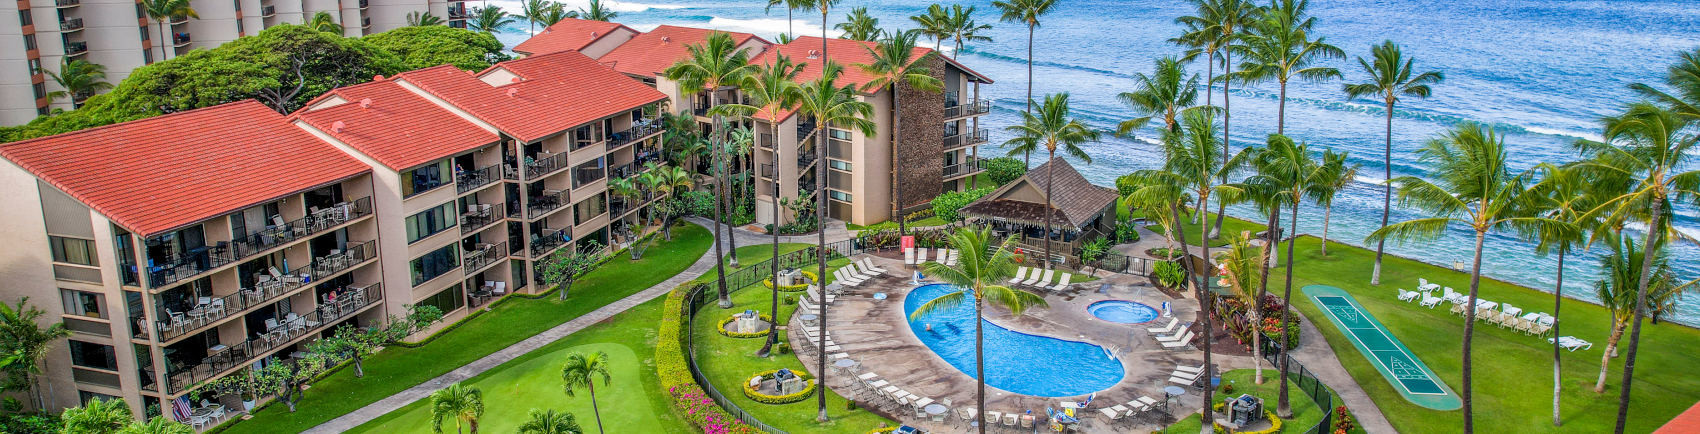 Aston at Papakea Resort Lawn Drone view of pool, palm trees, and ocean